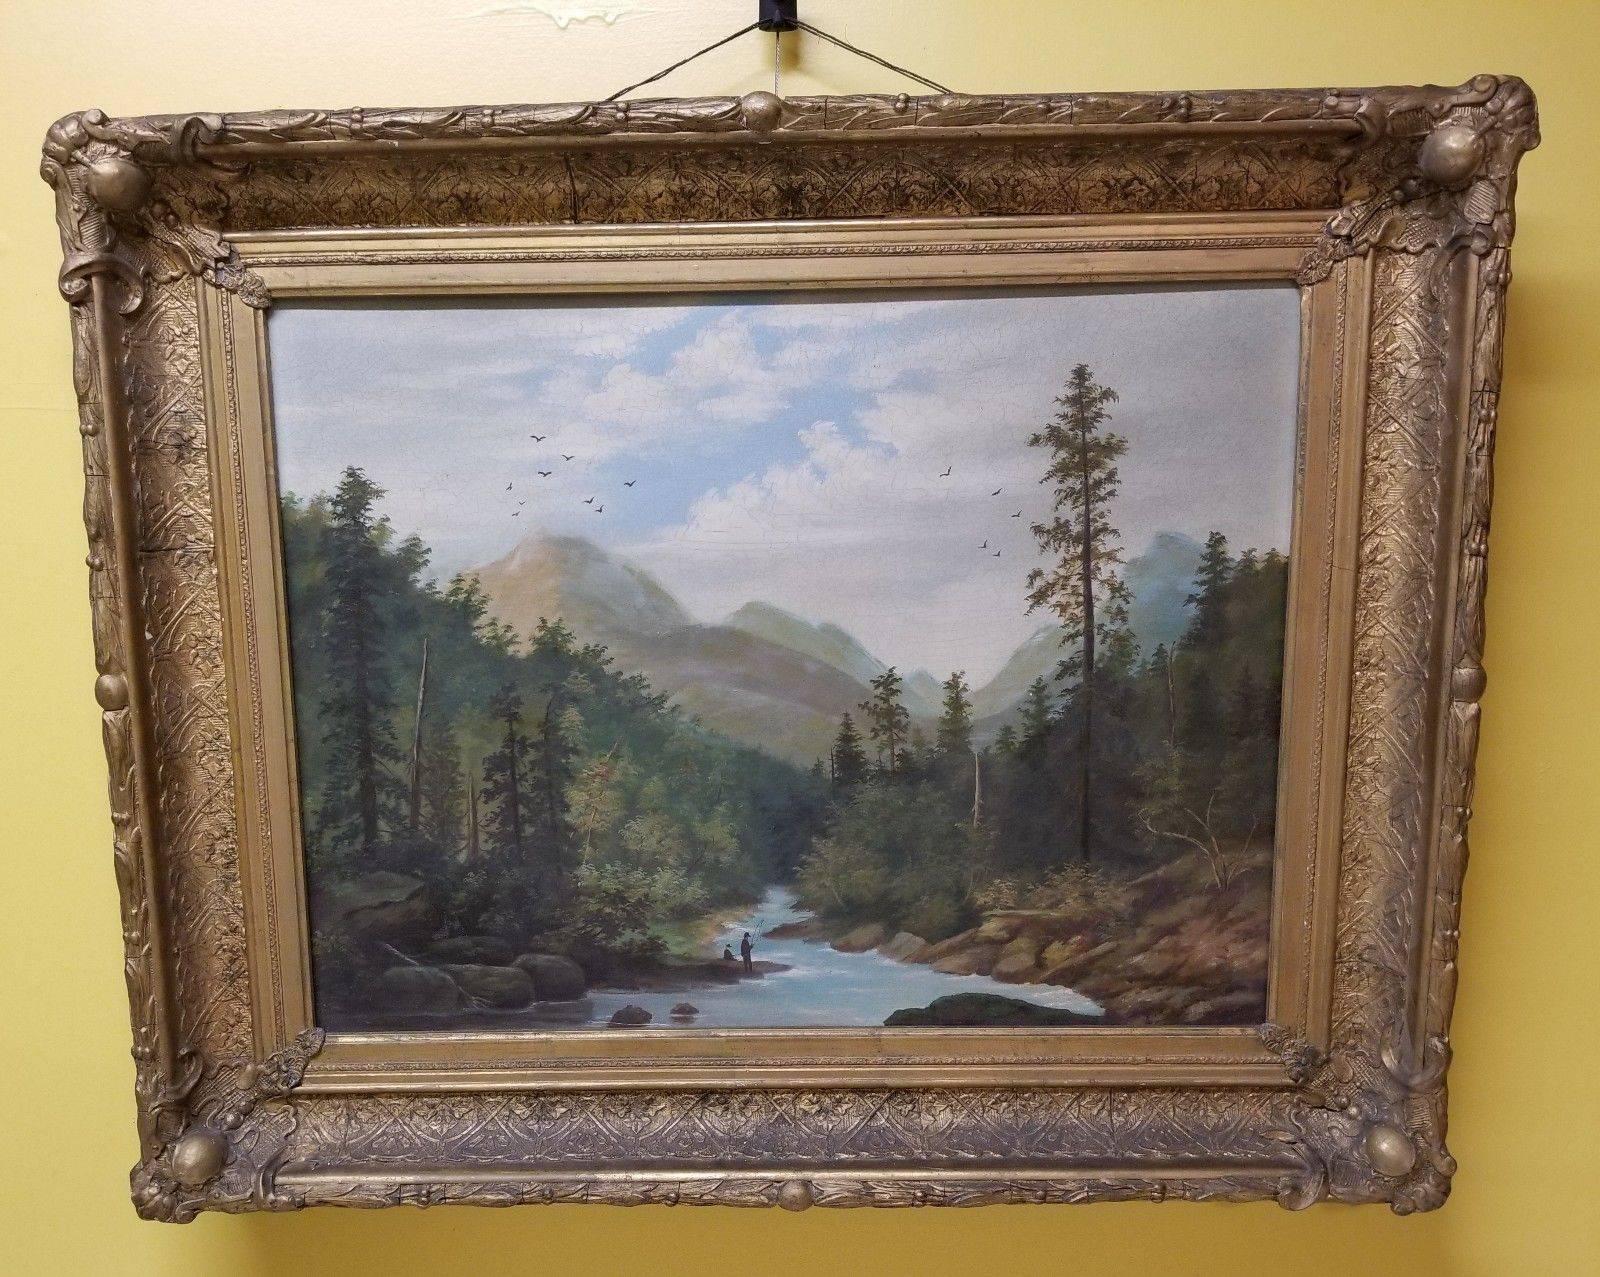 The painting is unsigned.

This is a beautiful estate found landscape of the Hudson River School from the 19th century period. This early American work shows all the wonderful elements used by the artist highlighting the grandeur of the mountains